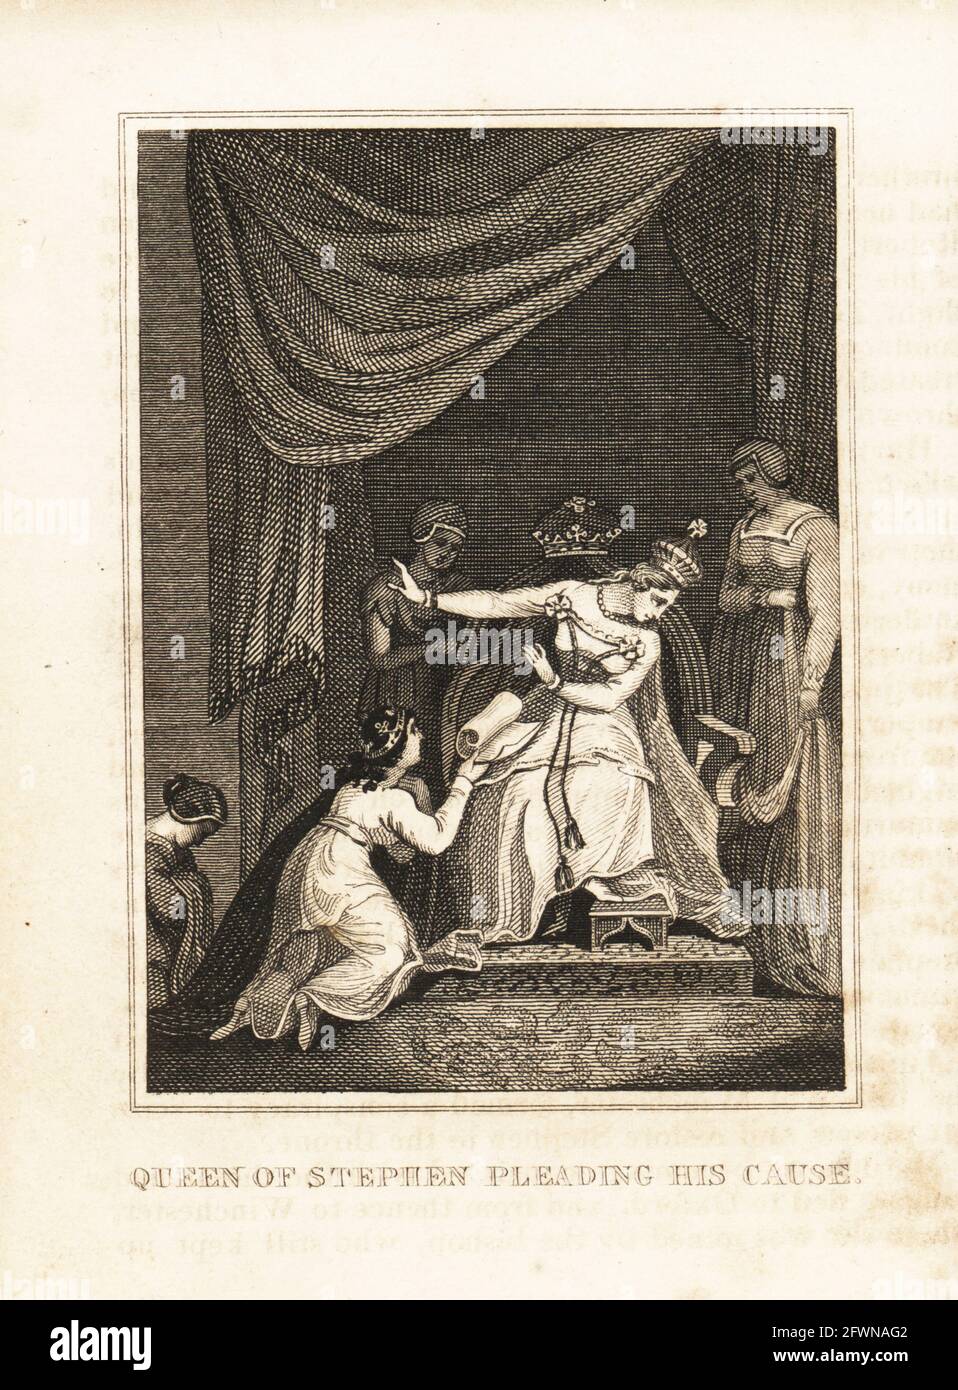 Matilda I, Countess of Boulogne (1105-1152) negotiating King Stephen's release with Empress Matilda (1102-1167). Queen of Stephen pleading his cause.  Copperplate engraving from M. A. Jones’ History of England from Julius Caesar to George IV, G. Virtue, 26 Ivy Lane, London, 1836. Stock Photo